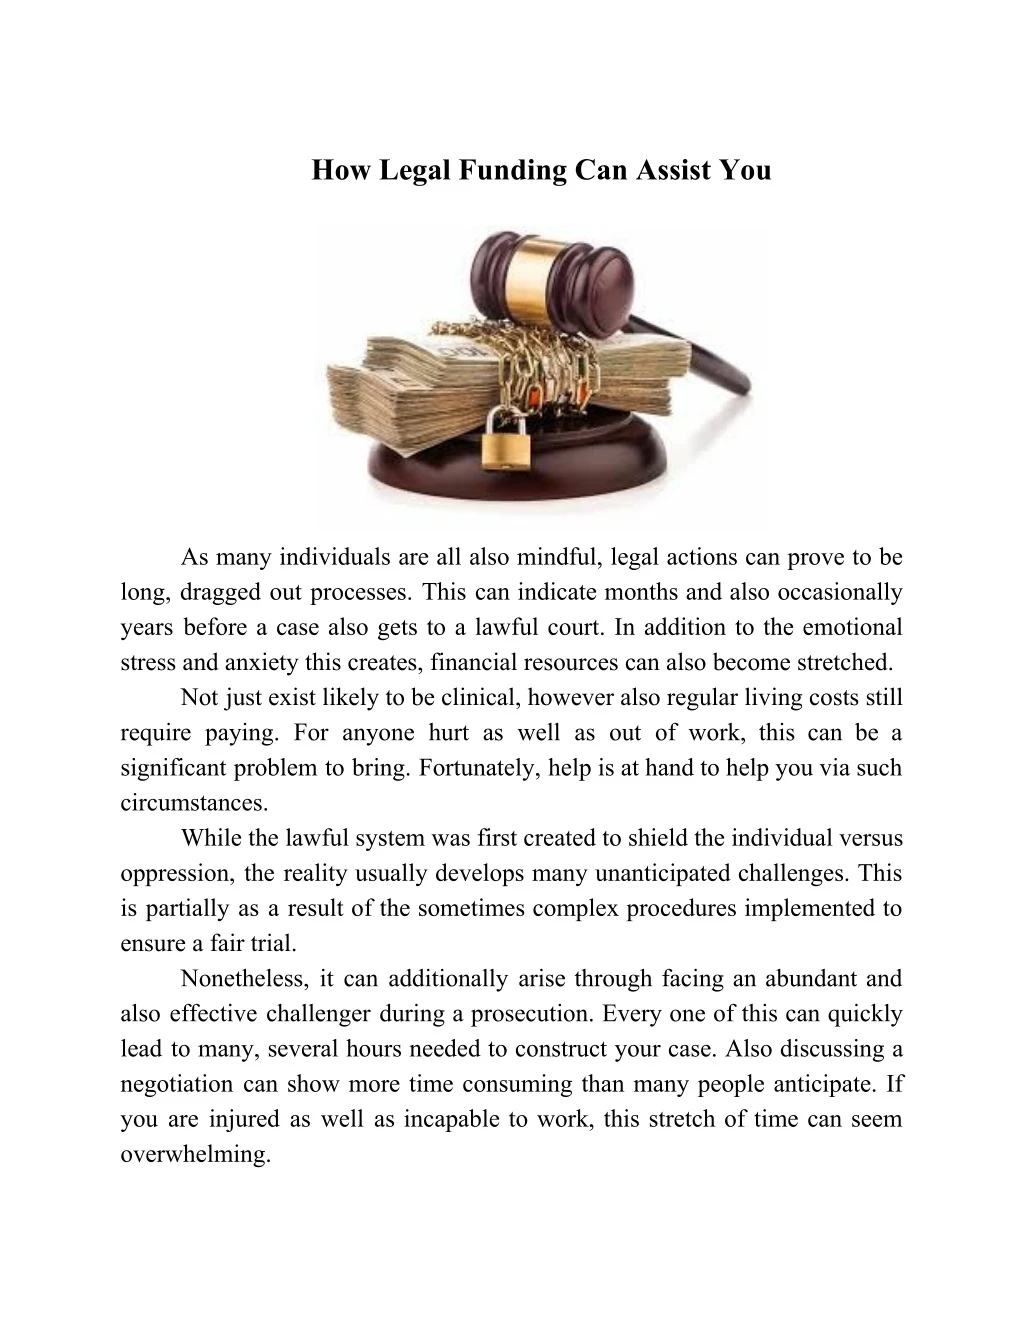 how legal funding can assist you